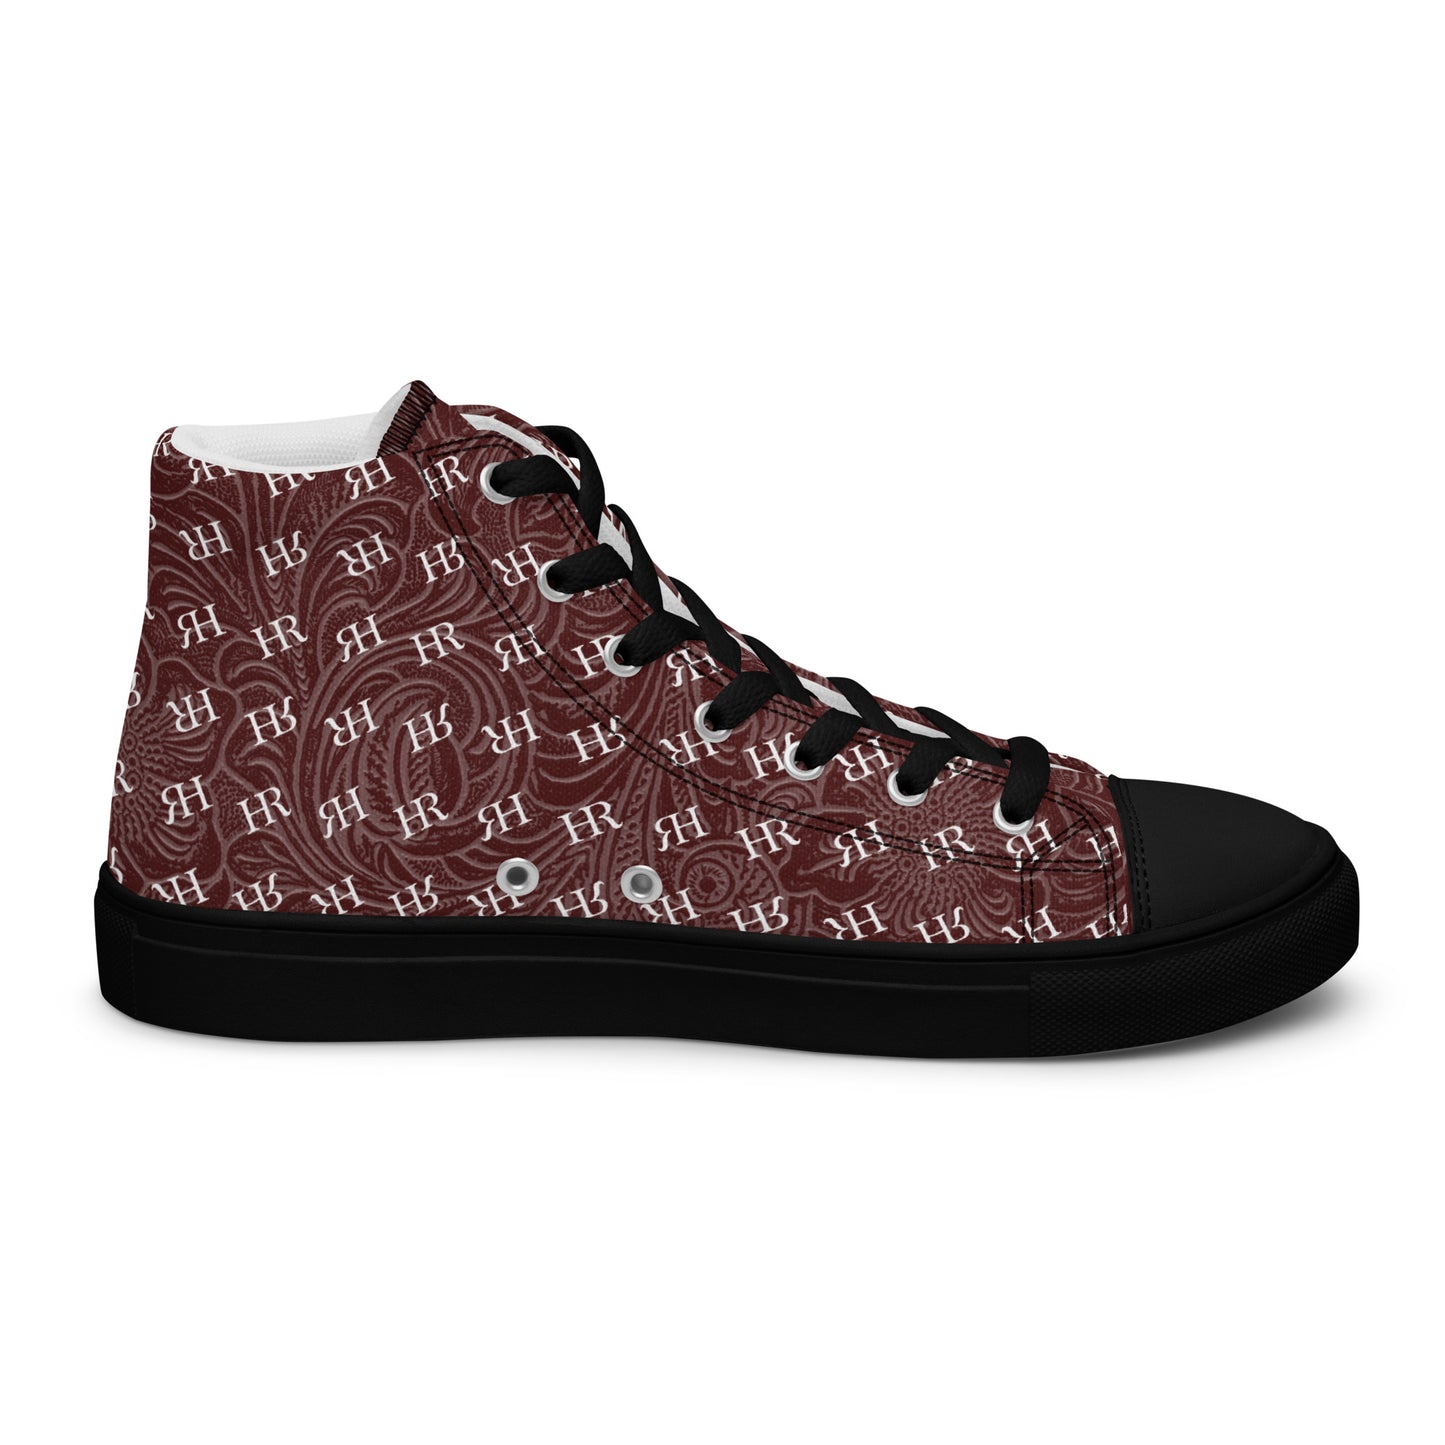 Humareso Team Lead Special Edition - Mens High-Tops